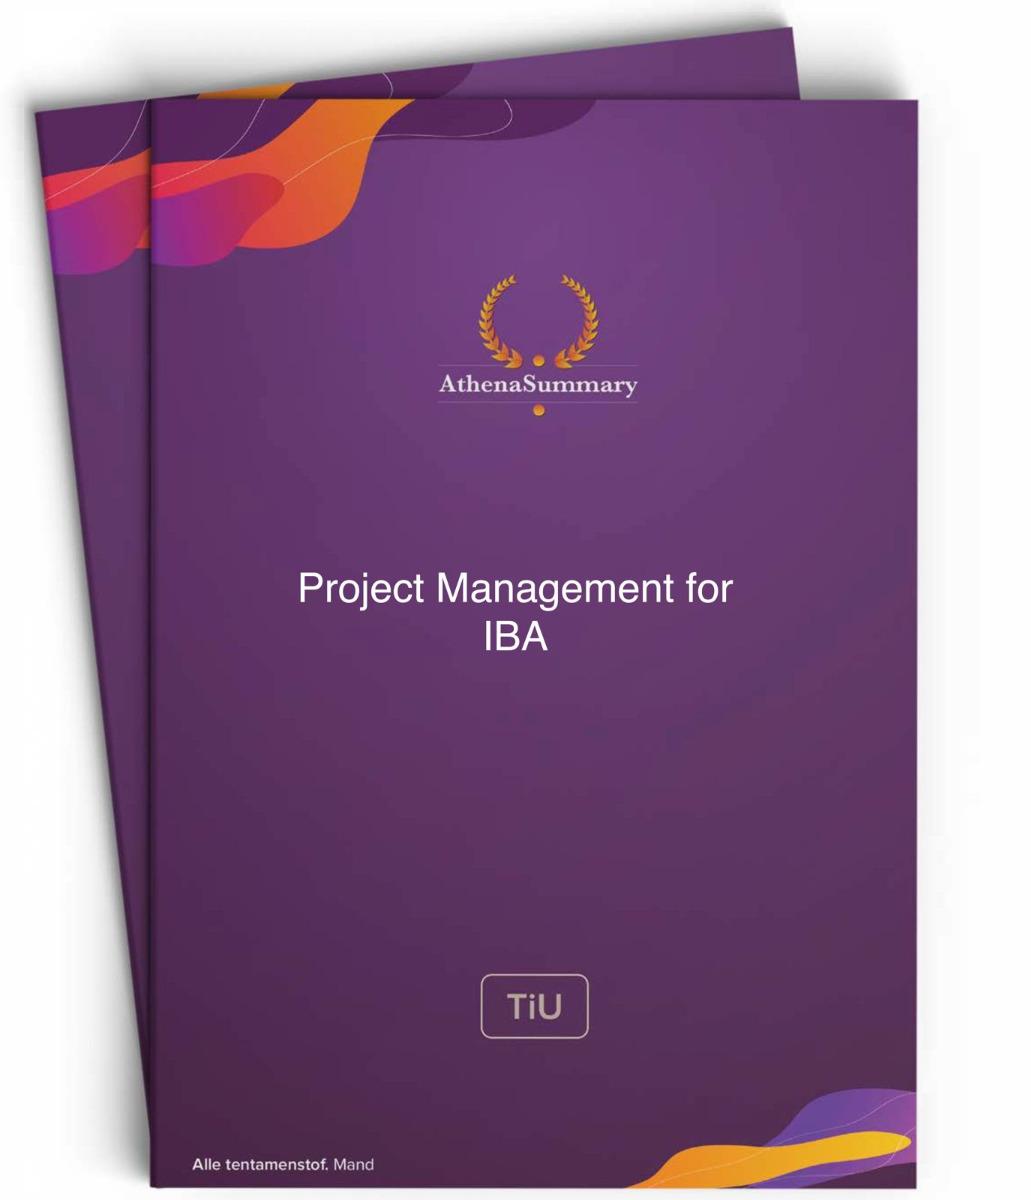 Literature Summary: Project Management for IBA